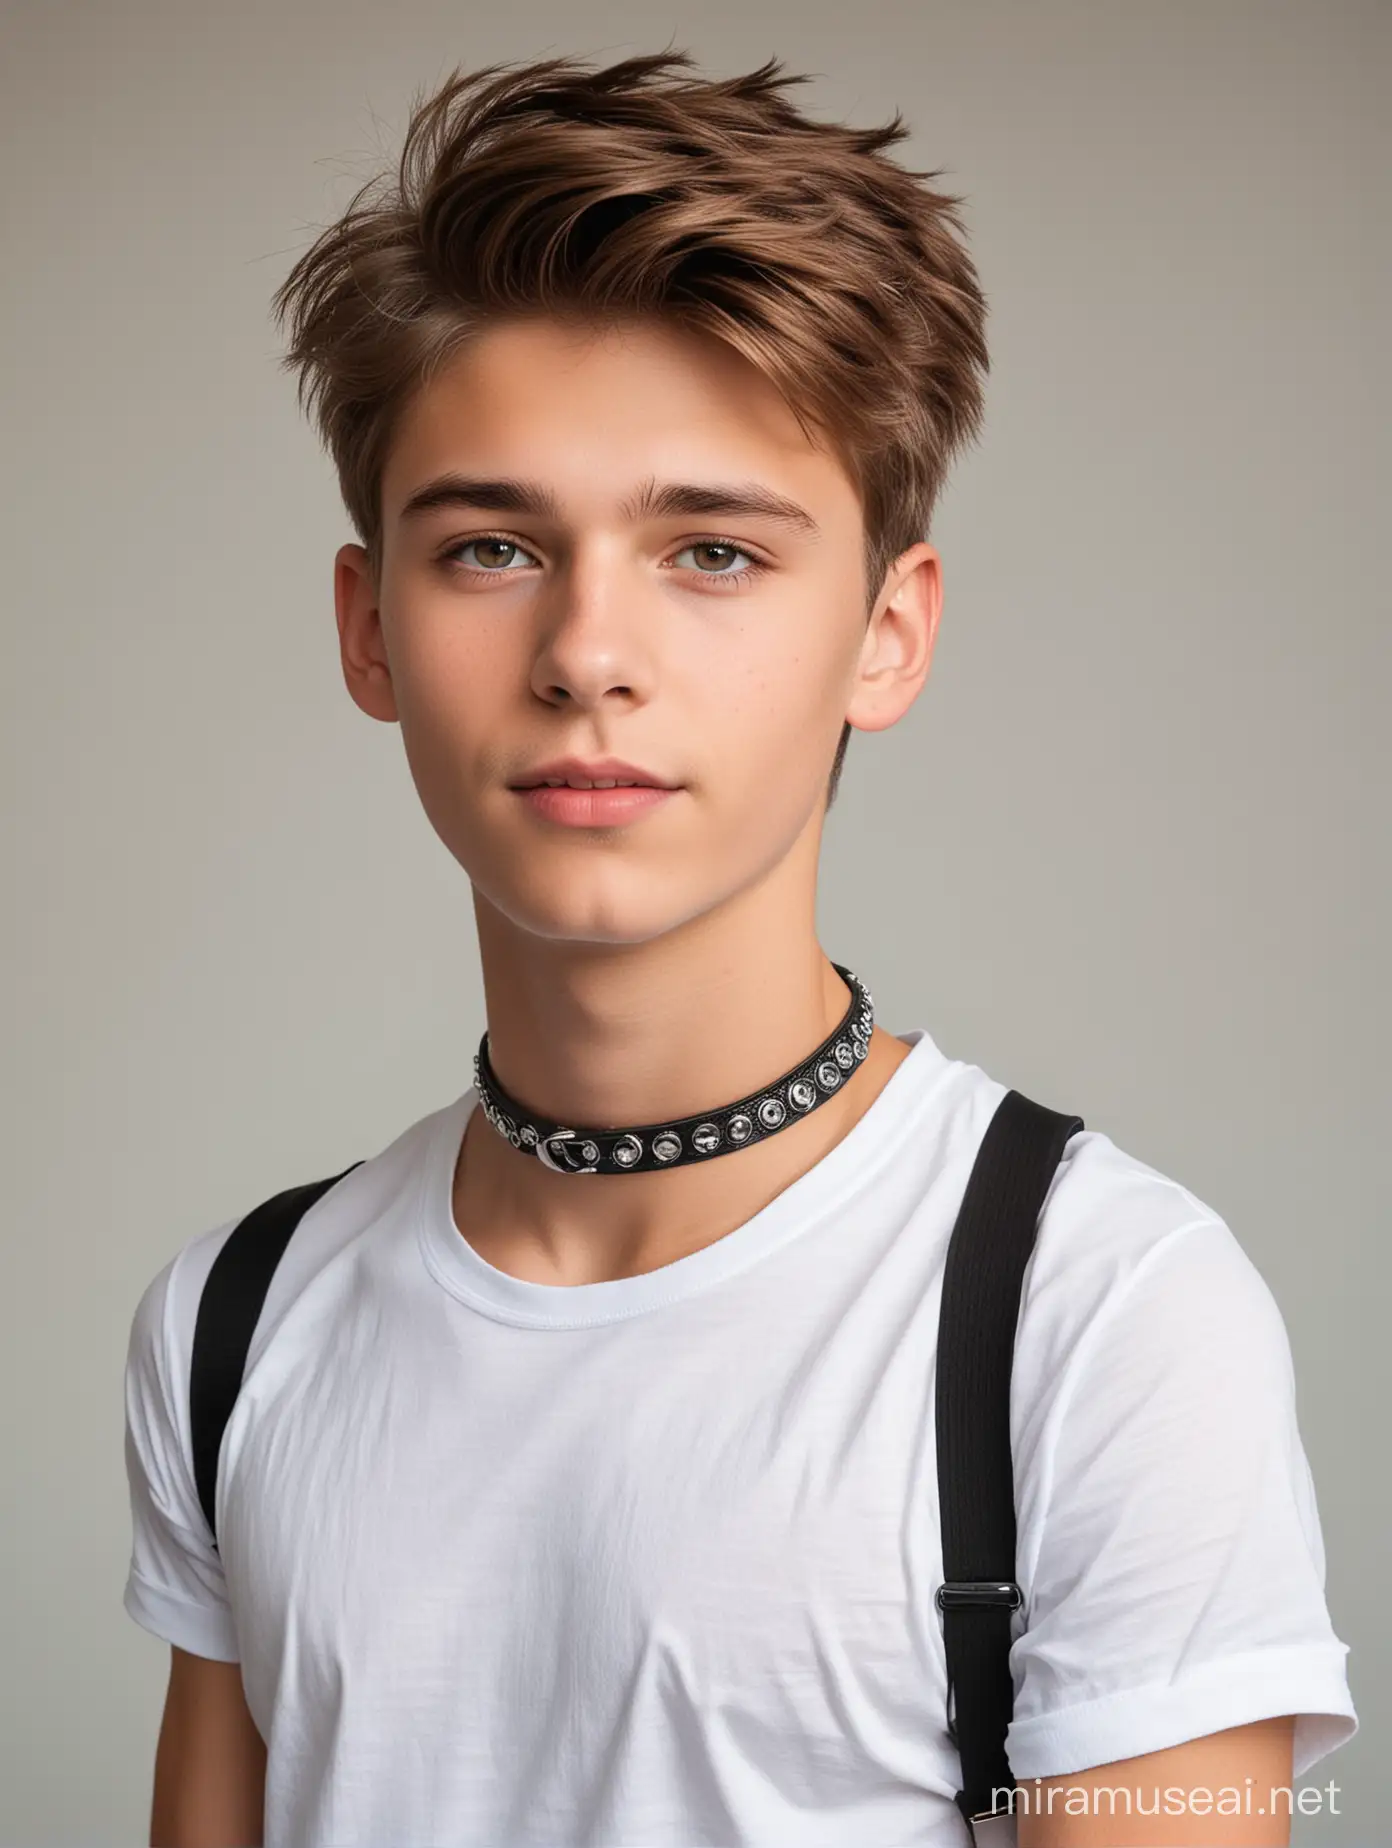 Young Twink with Dog Collar Stylish Portrait in a Casual Setting